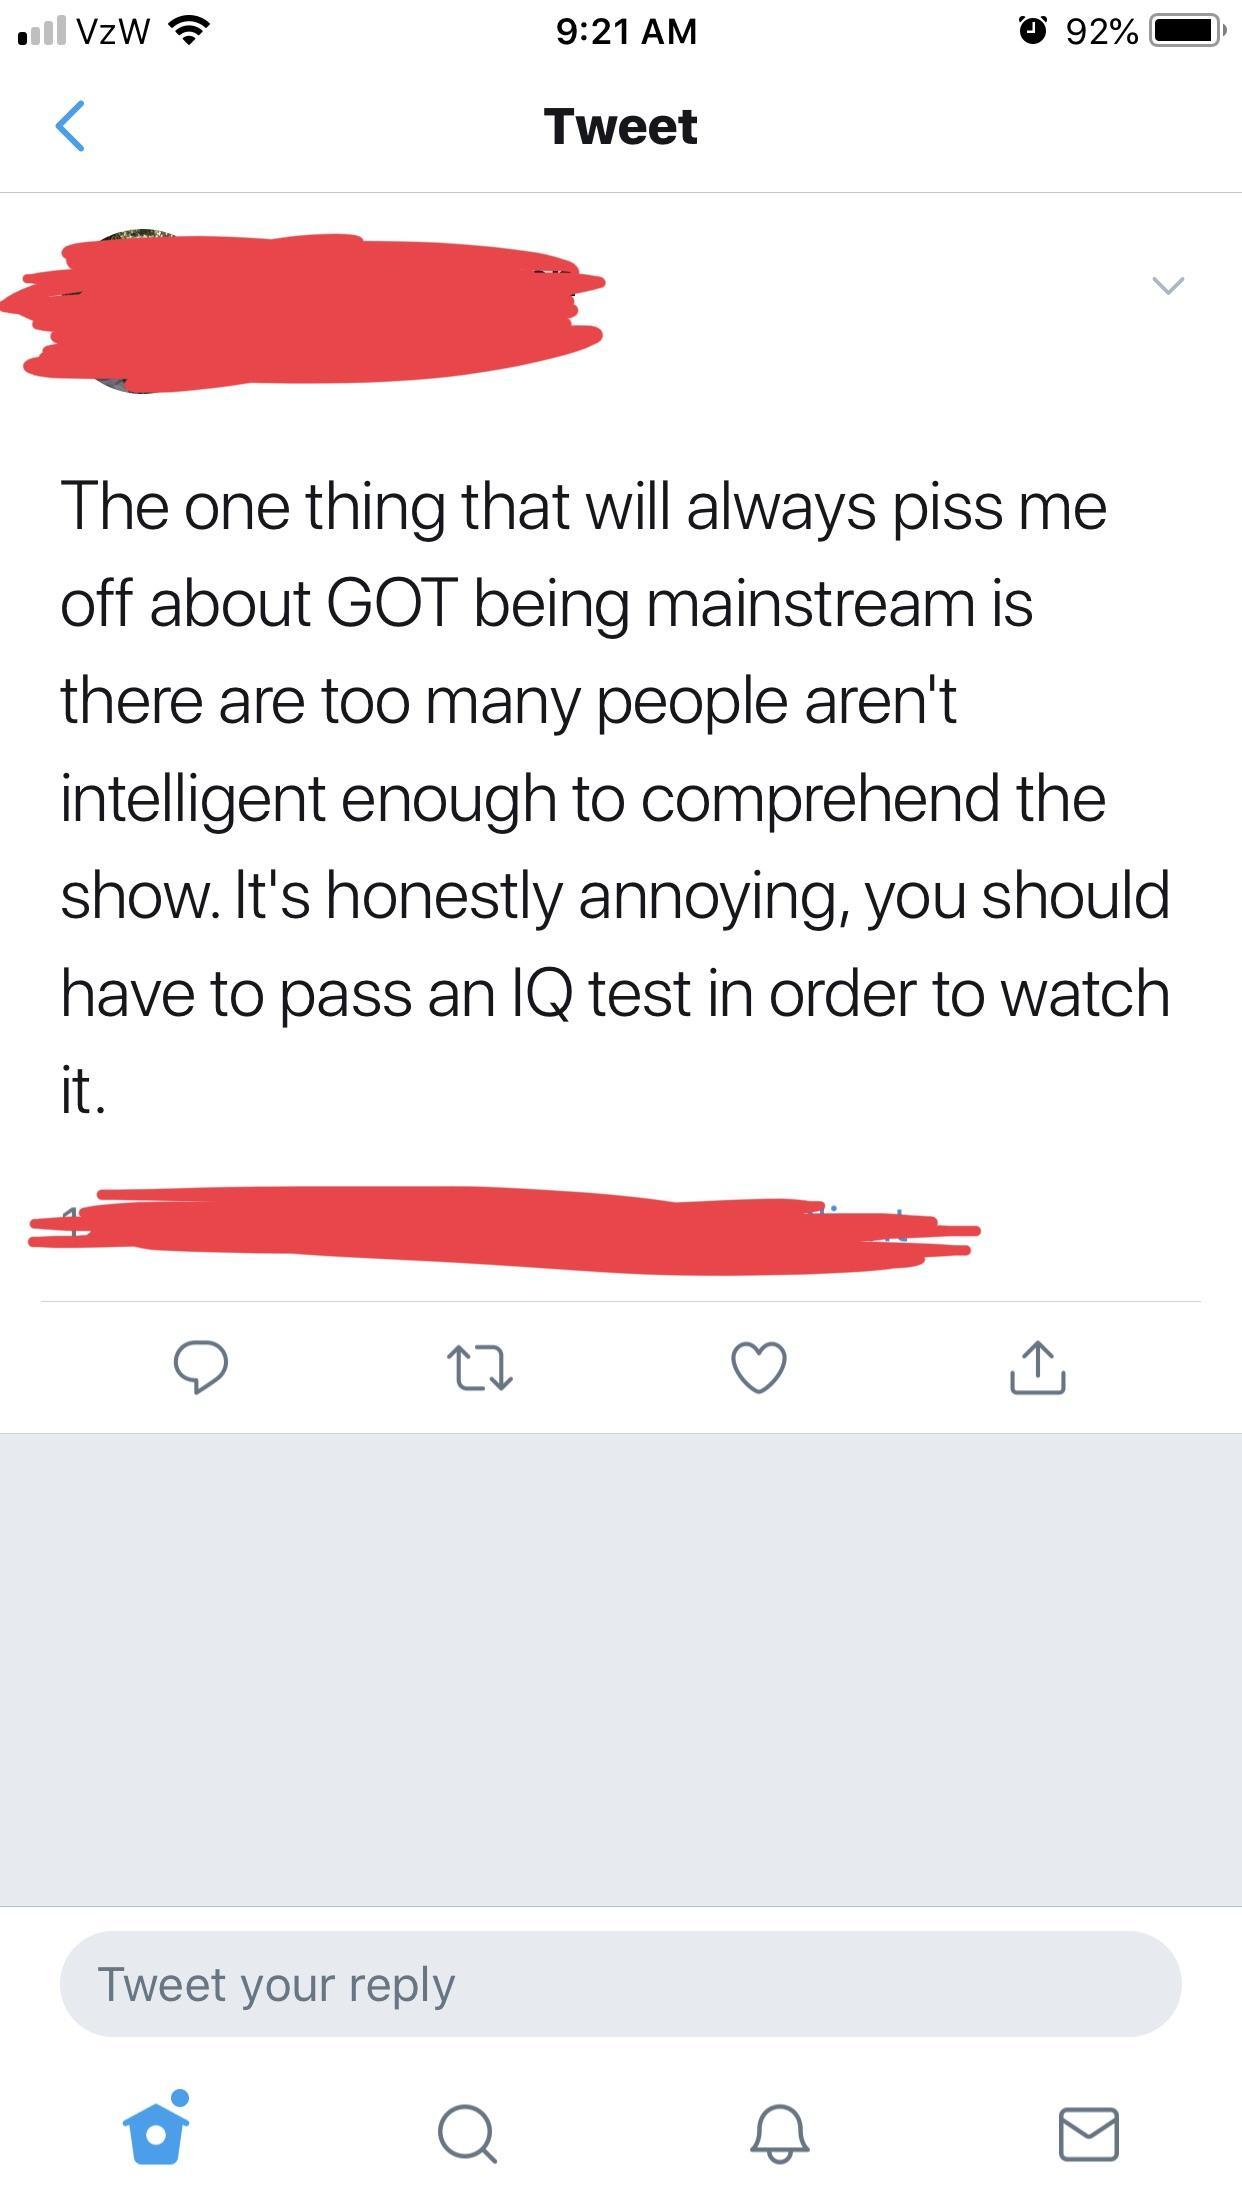 screenshot - Il VzW 92% Tweet The one thing that will always piss me off about Got being mainstream is there are too many people aren't intelligent enough to comprehend the show. It's honestly annoying, you should have to pass an Iq test in order to watch